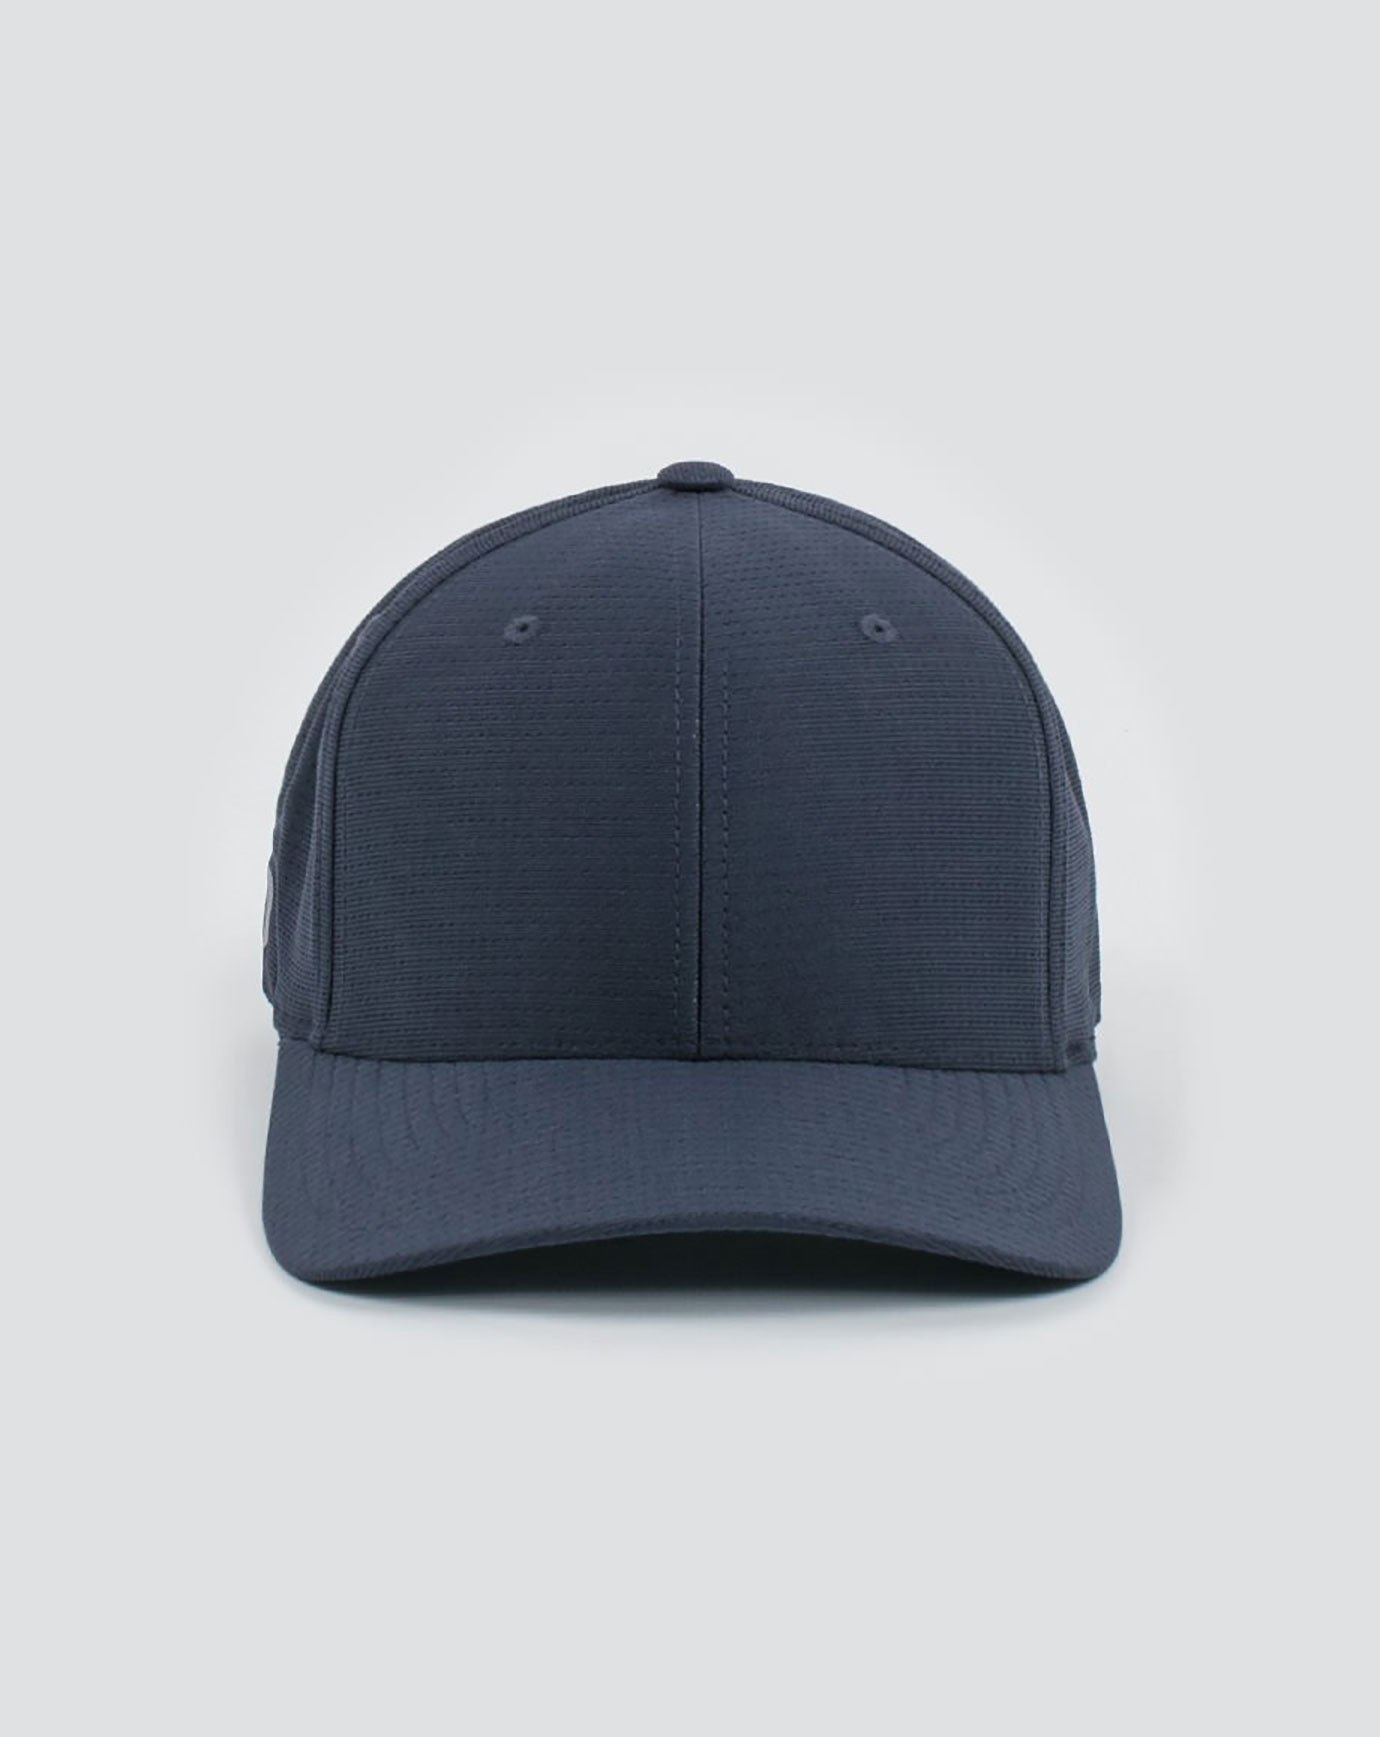 NASSAU FITTED HAT Image Thumbnail 1